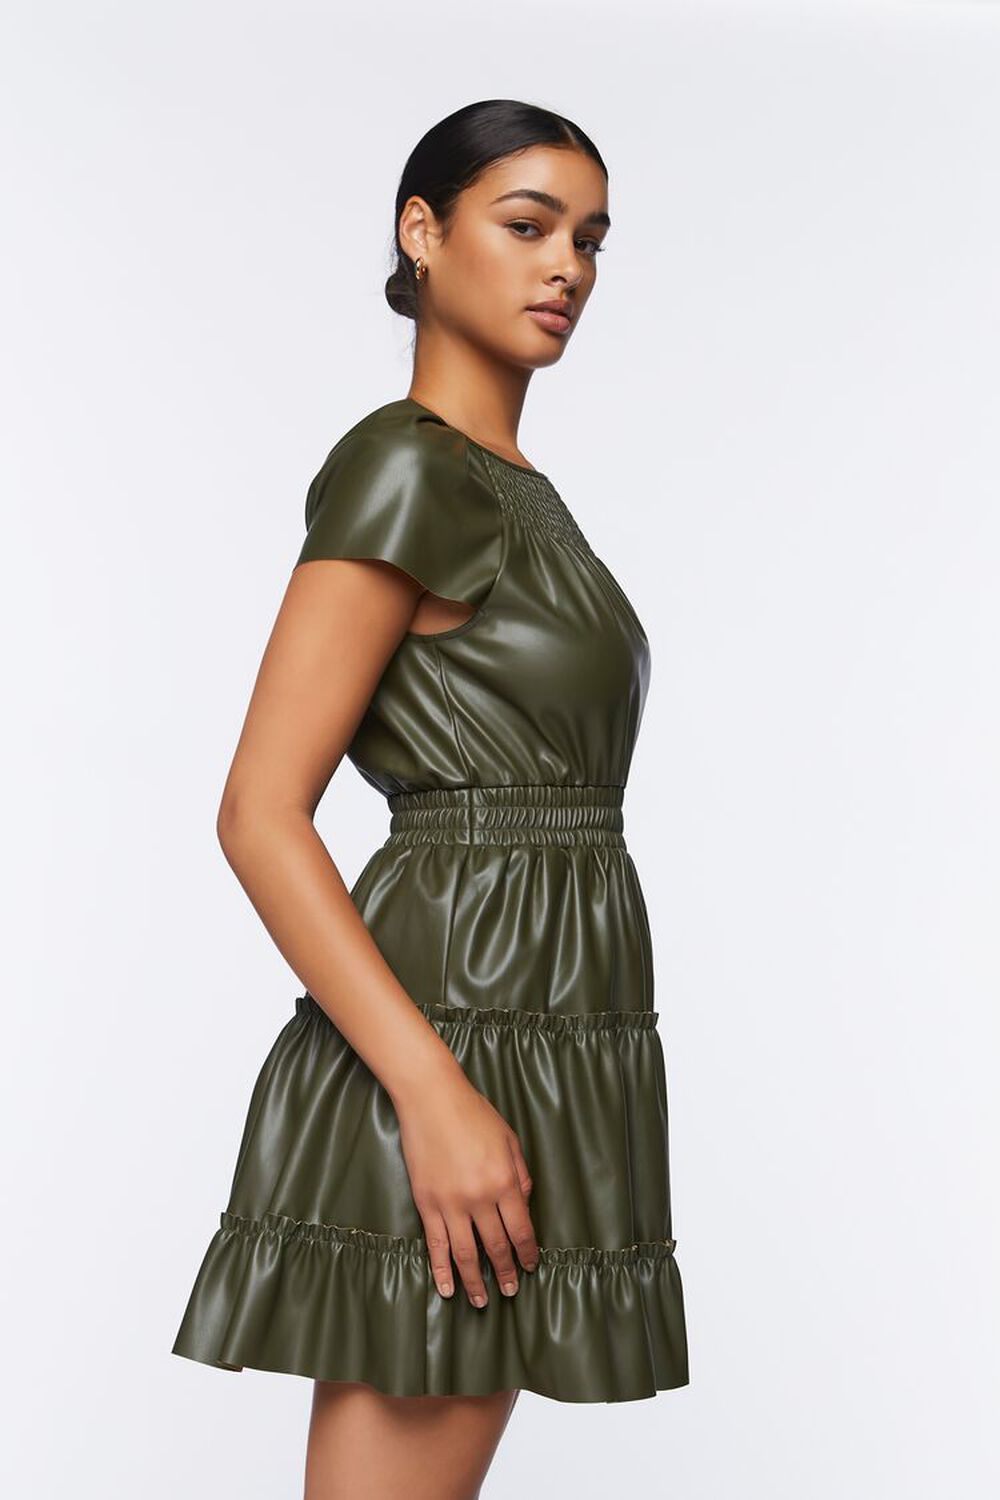 OLIVE Faux Leather Tiered Mini Dress, image 2